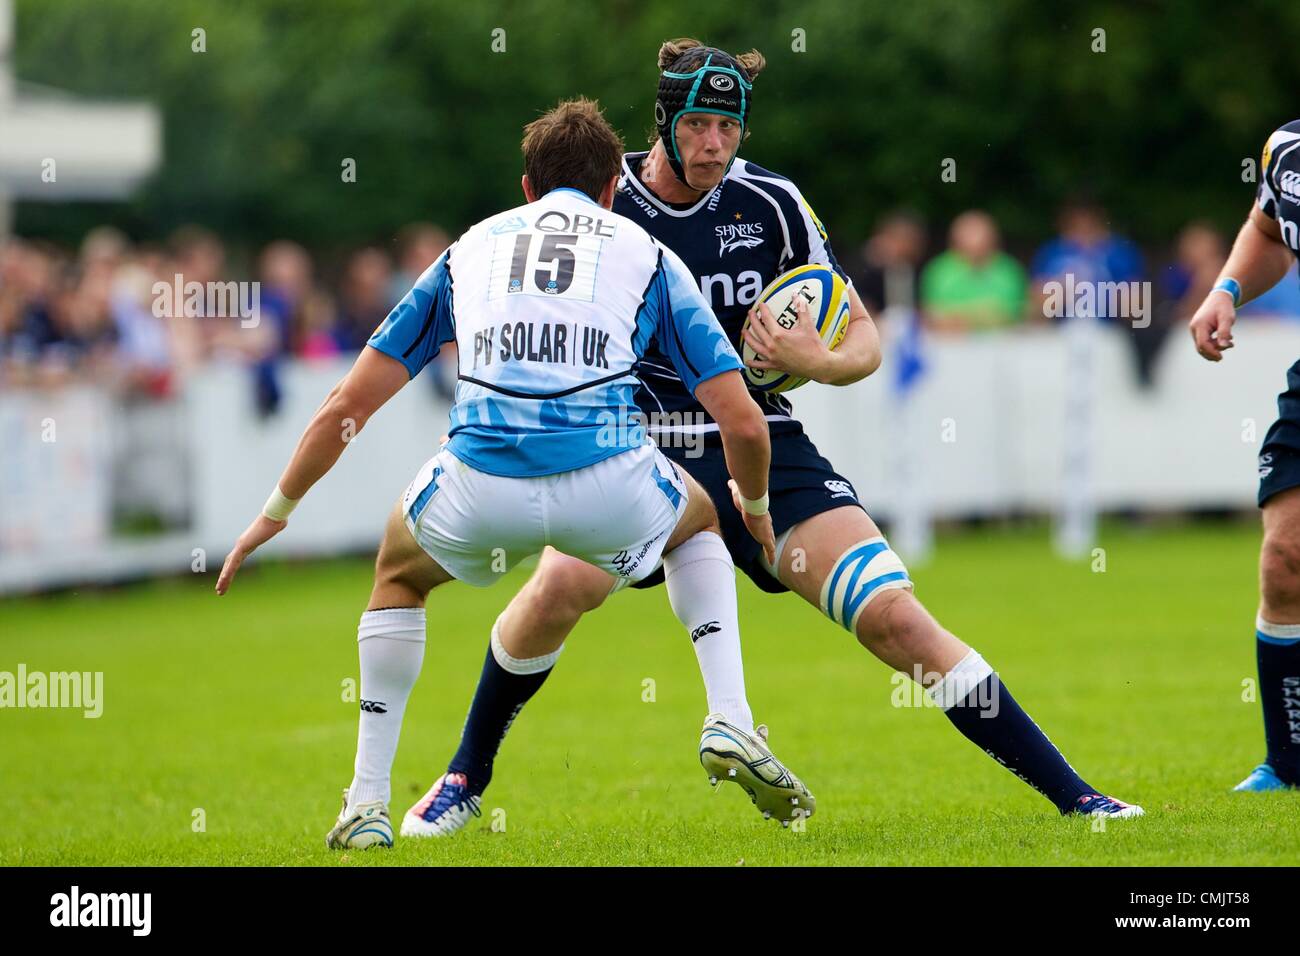 18.08.2012 Sale, England. Sale Sharks flanker James Gaskell (ENG) and Glasgow Warriors fullback Peter Murchie (SCO) in action during the Mark Cueto Testimonial match between Sale Sharks and Glasgow Warriors. Stock Photo